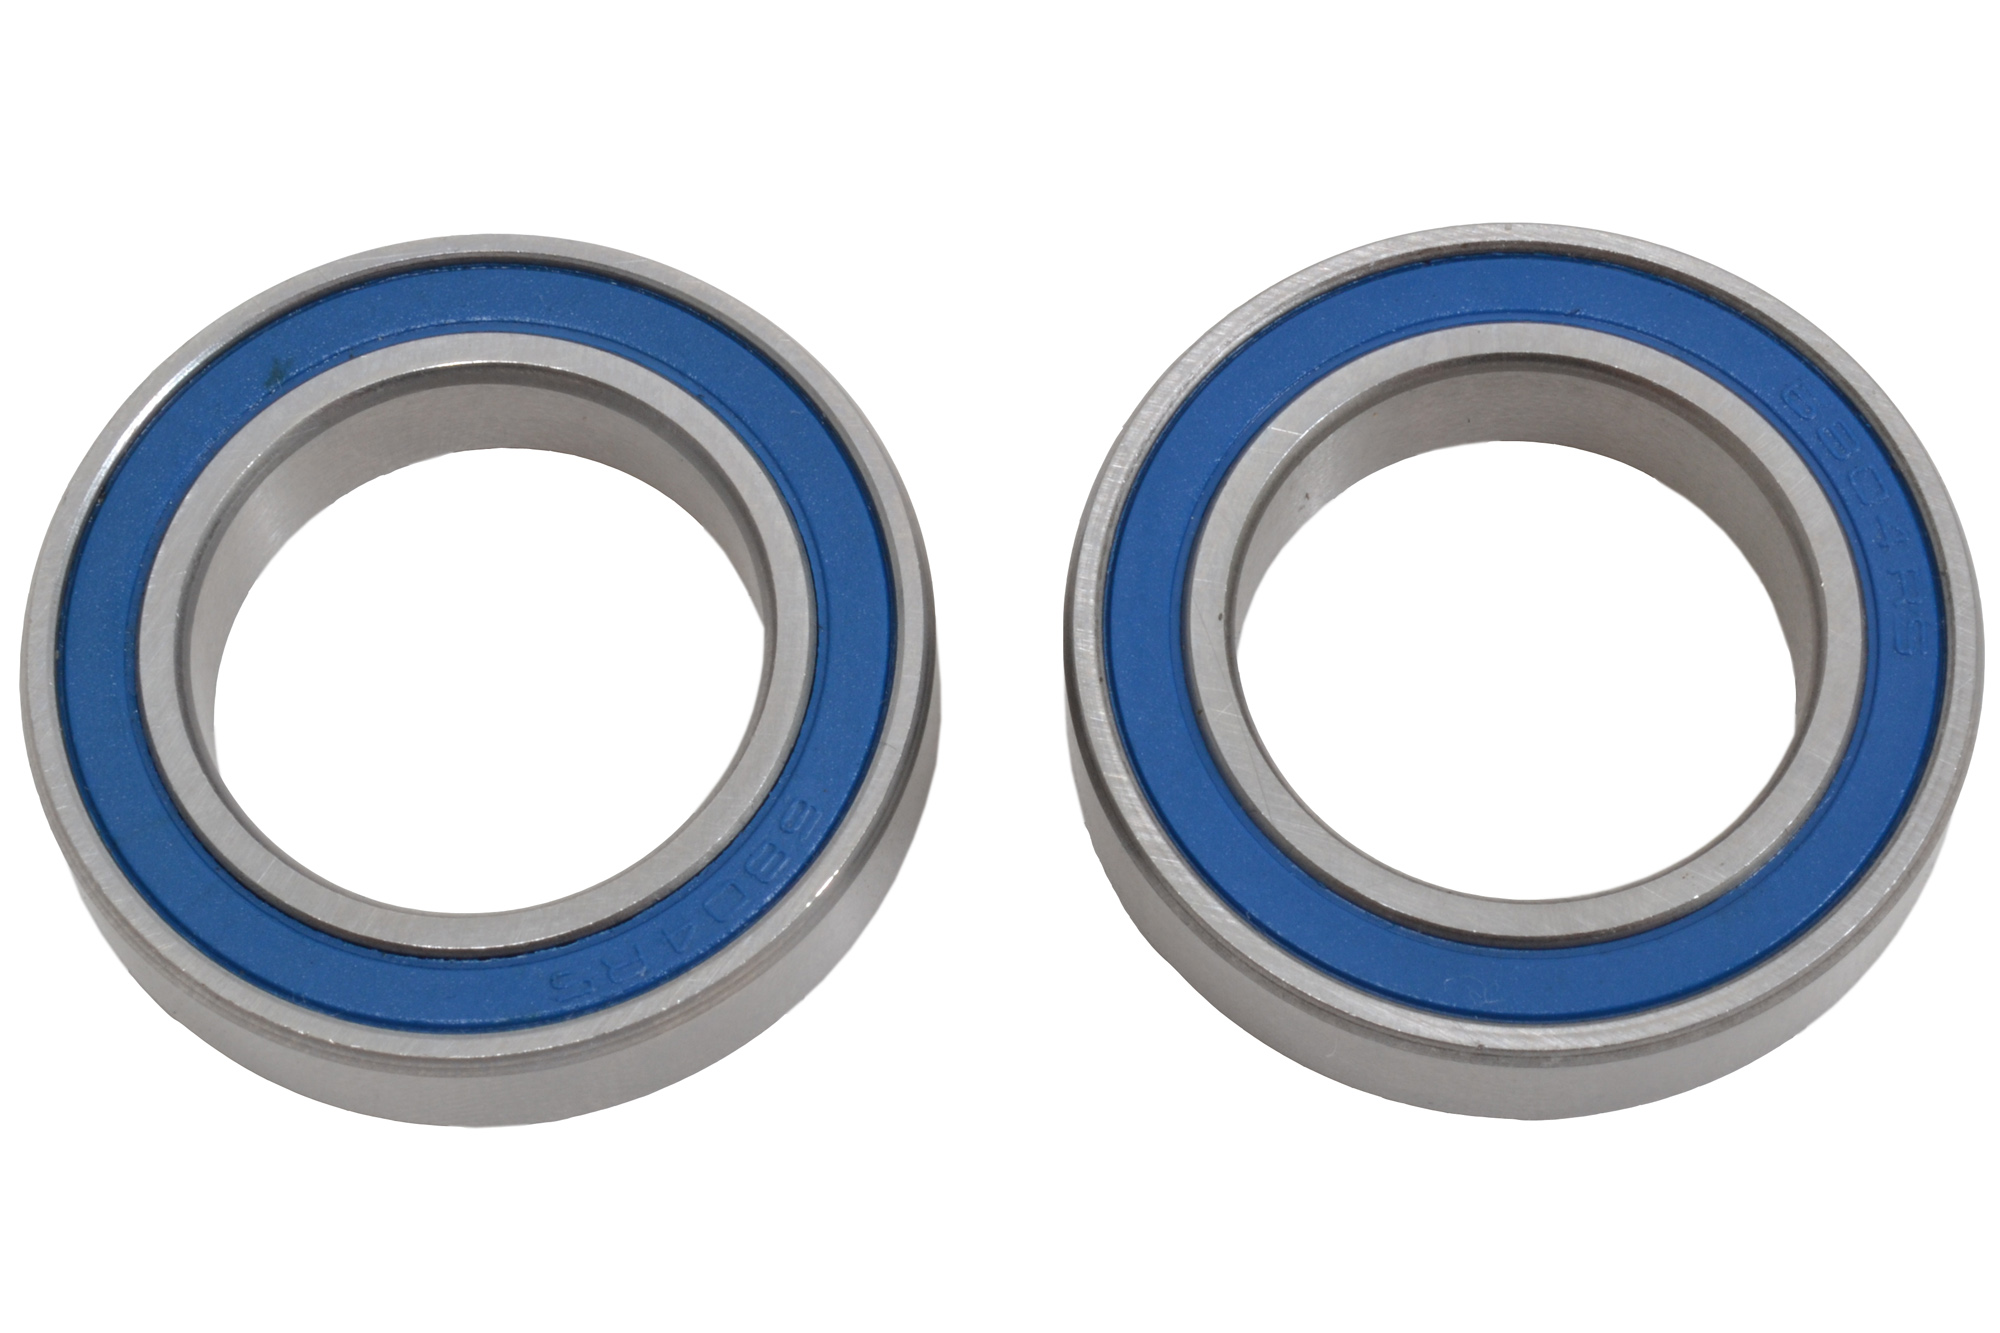 Replacement Bearings for RPM X-Maxx Oversized Axle Carriers - RPM 